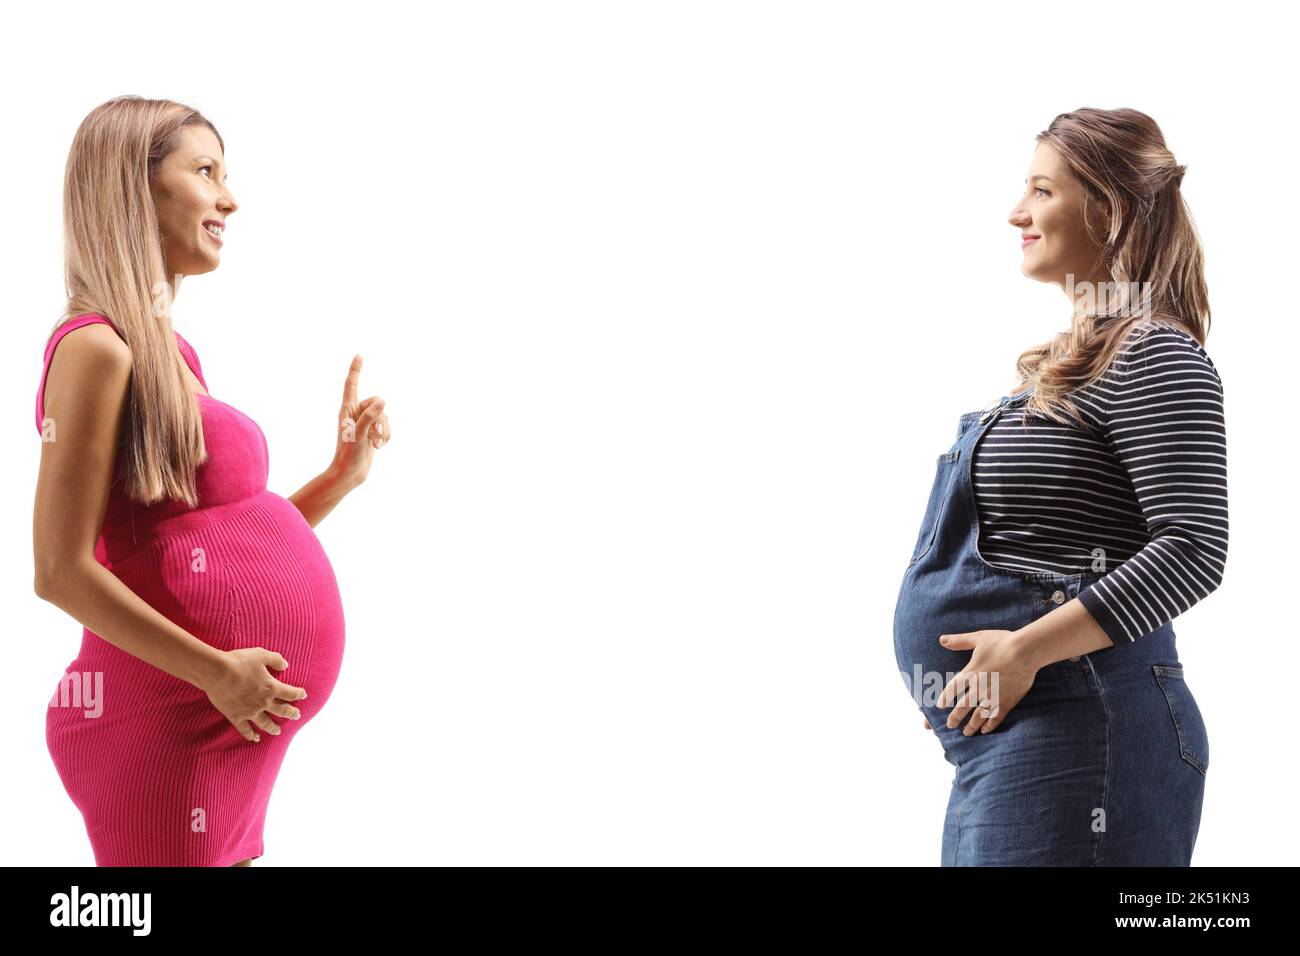 Pregnant women having a conversation isolated on white background Stock Photo